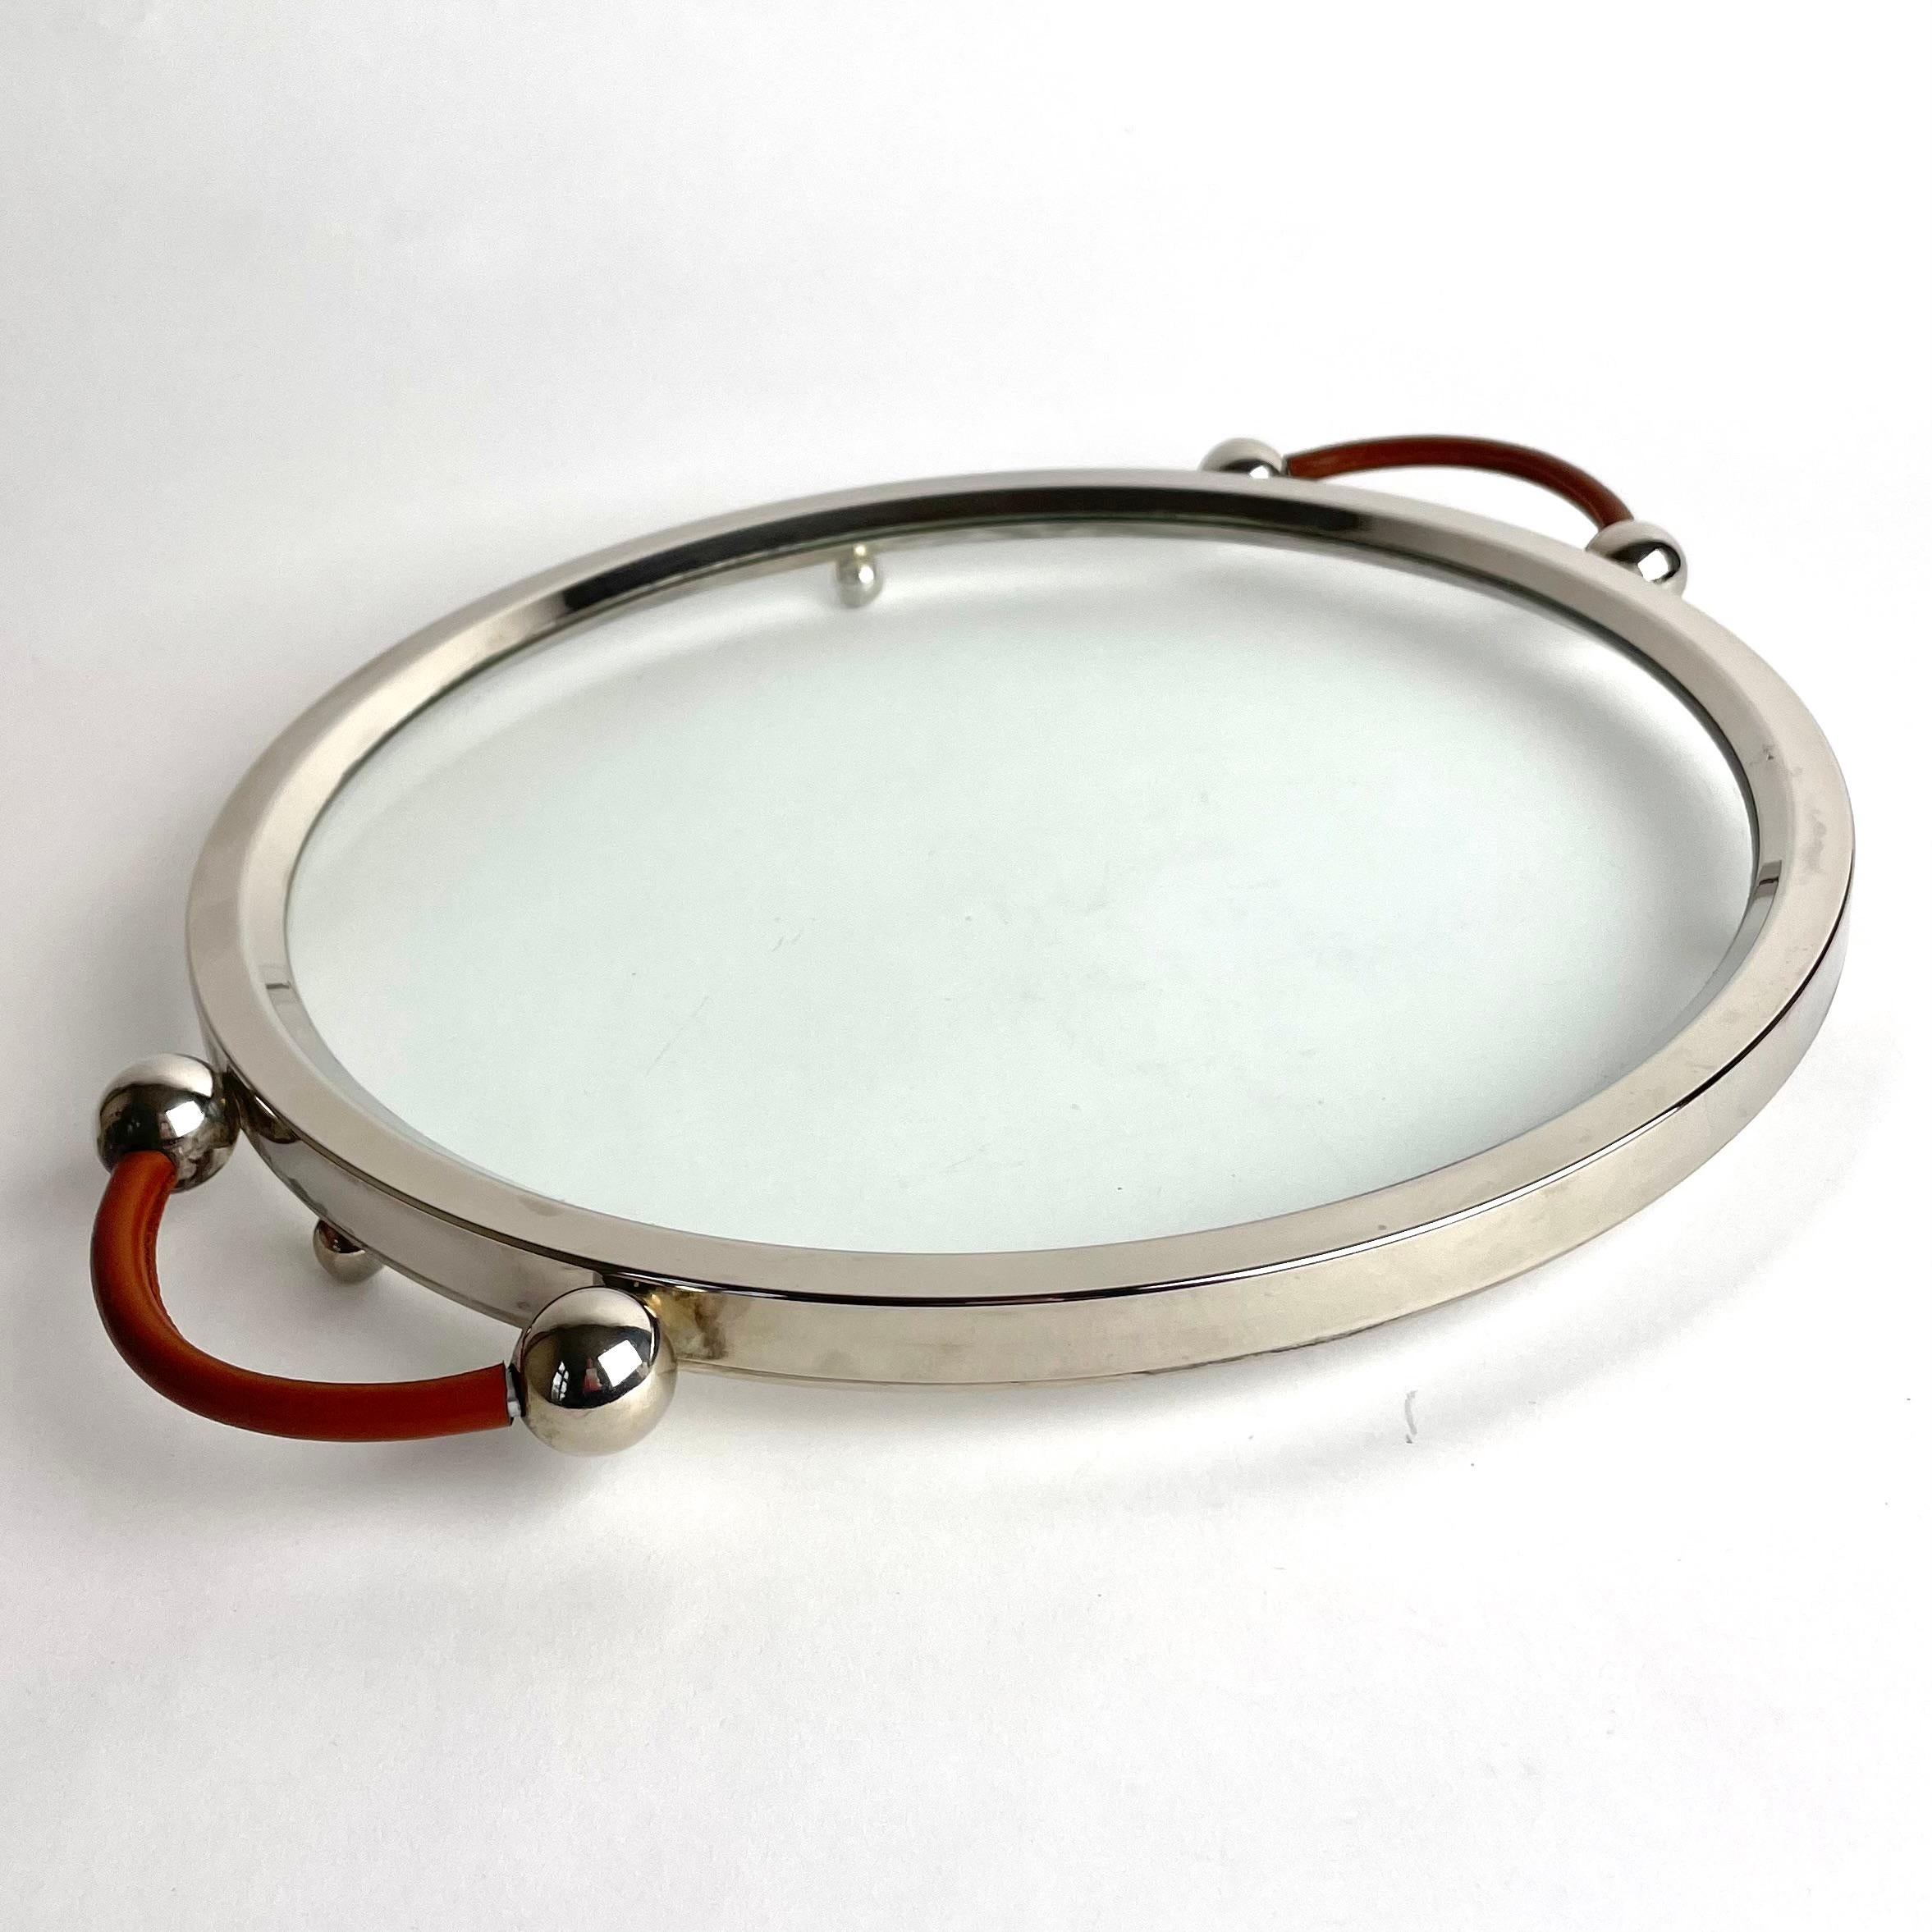 Elegant Art Deco Cocktail Tray from the 1920s in glass, silver plate and leather. Made in glass with a silver-plated metal frame and leather-covered handles. Very period Art Deco.

Wear consistent with age and use